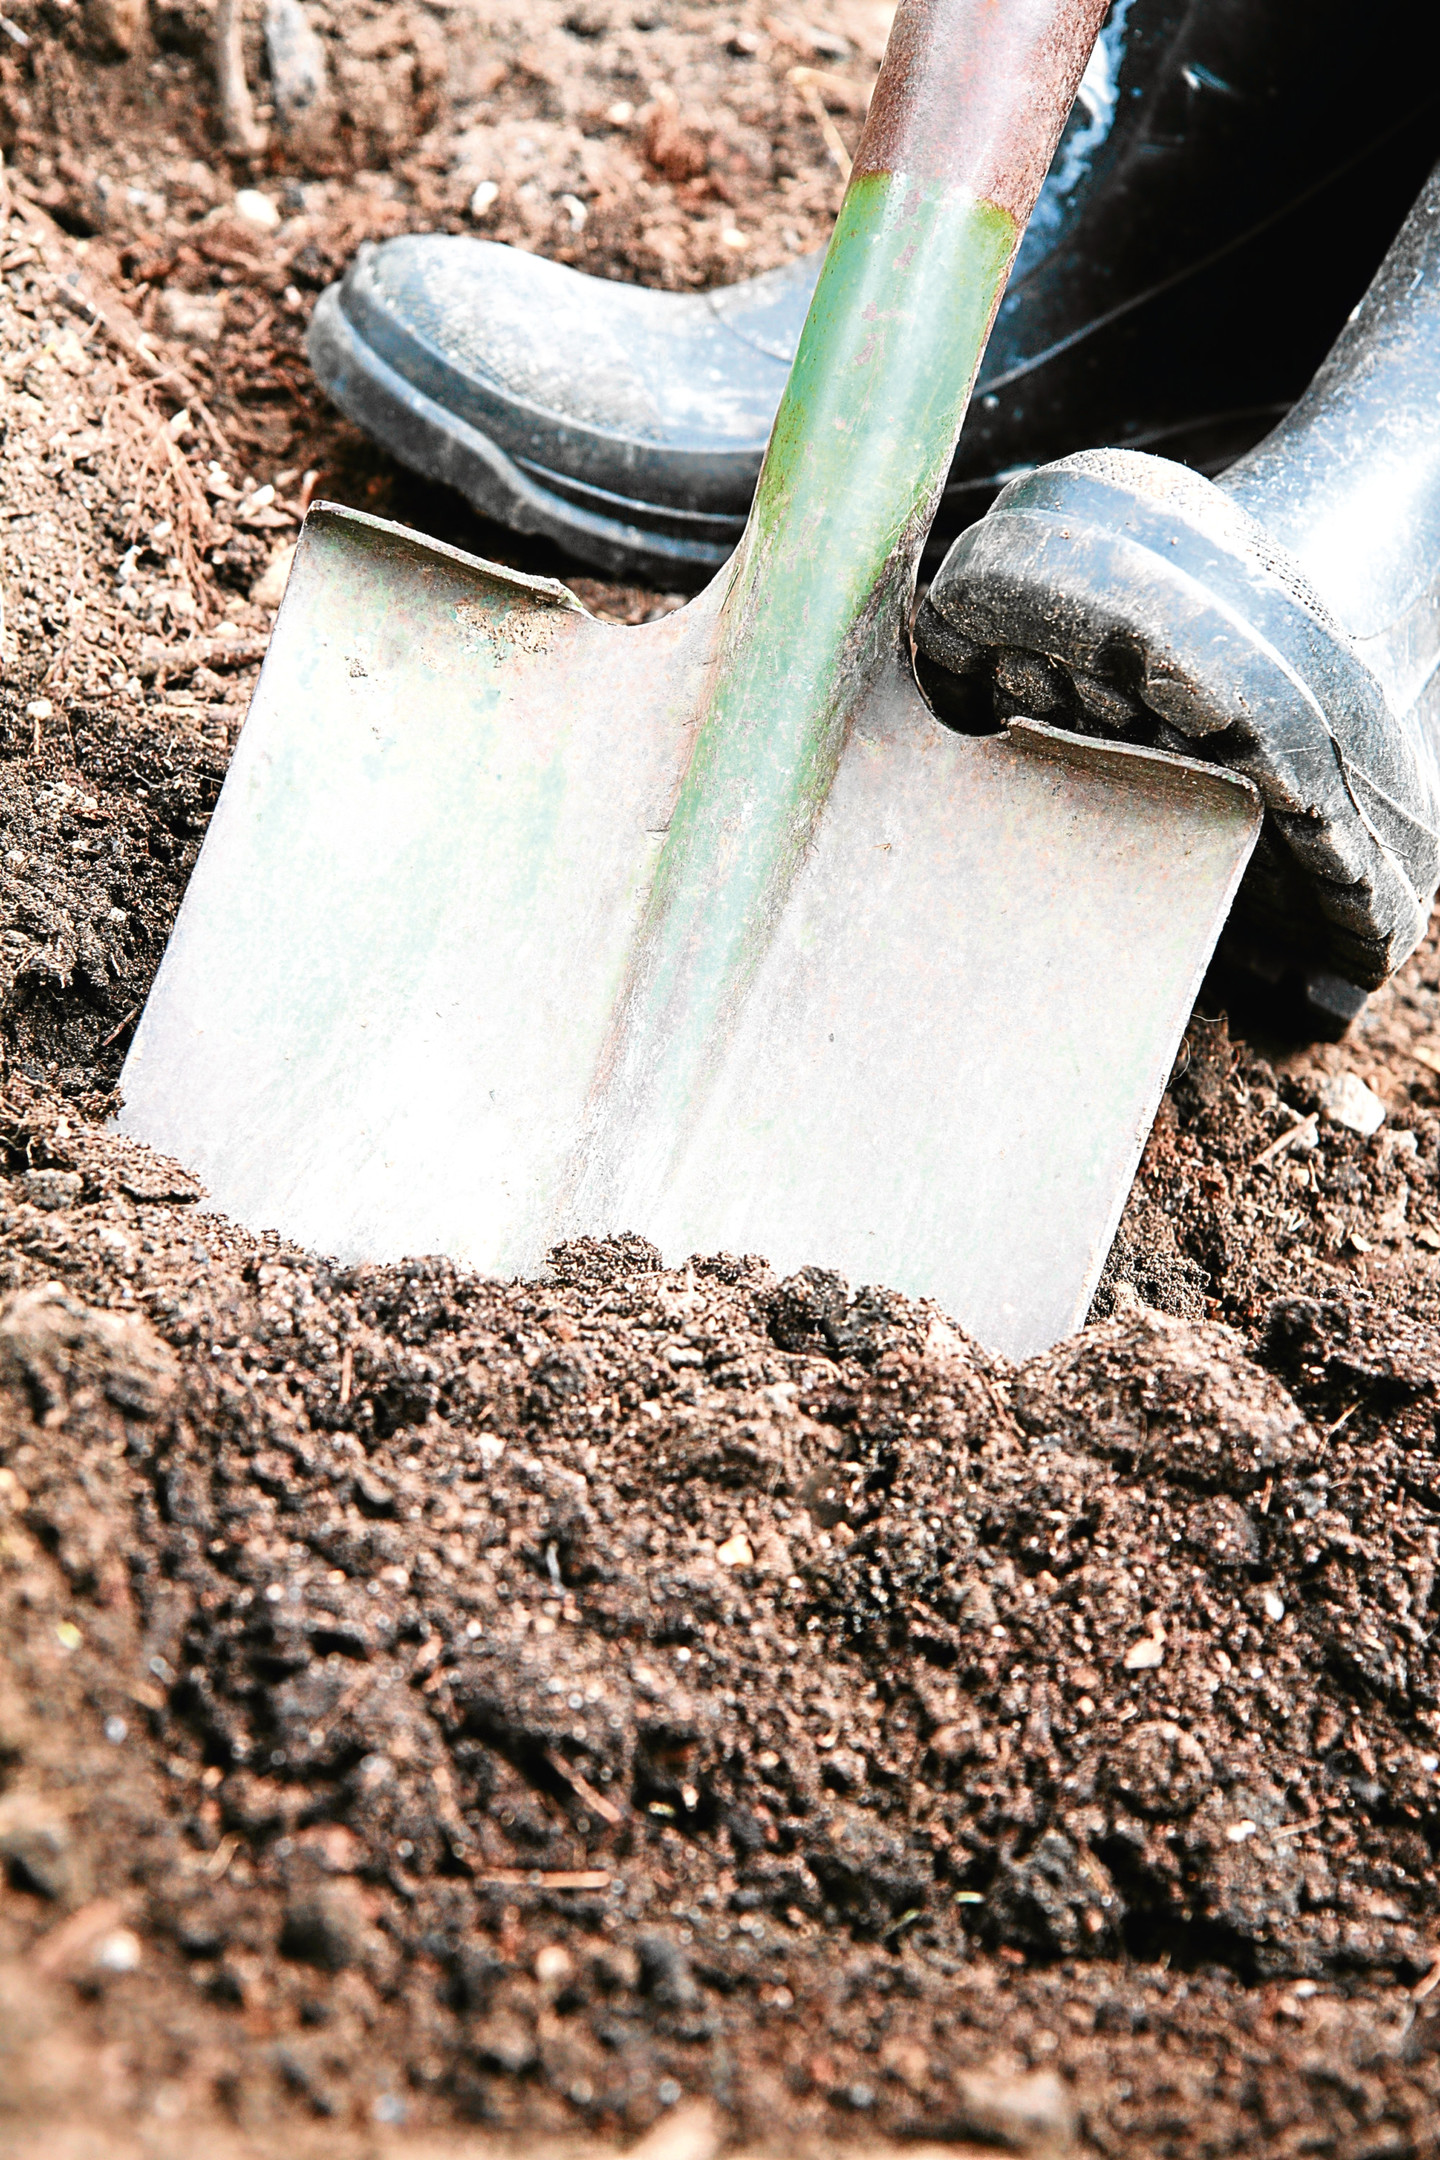 The soil will be analysed by experts.



THINKSTOCK